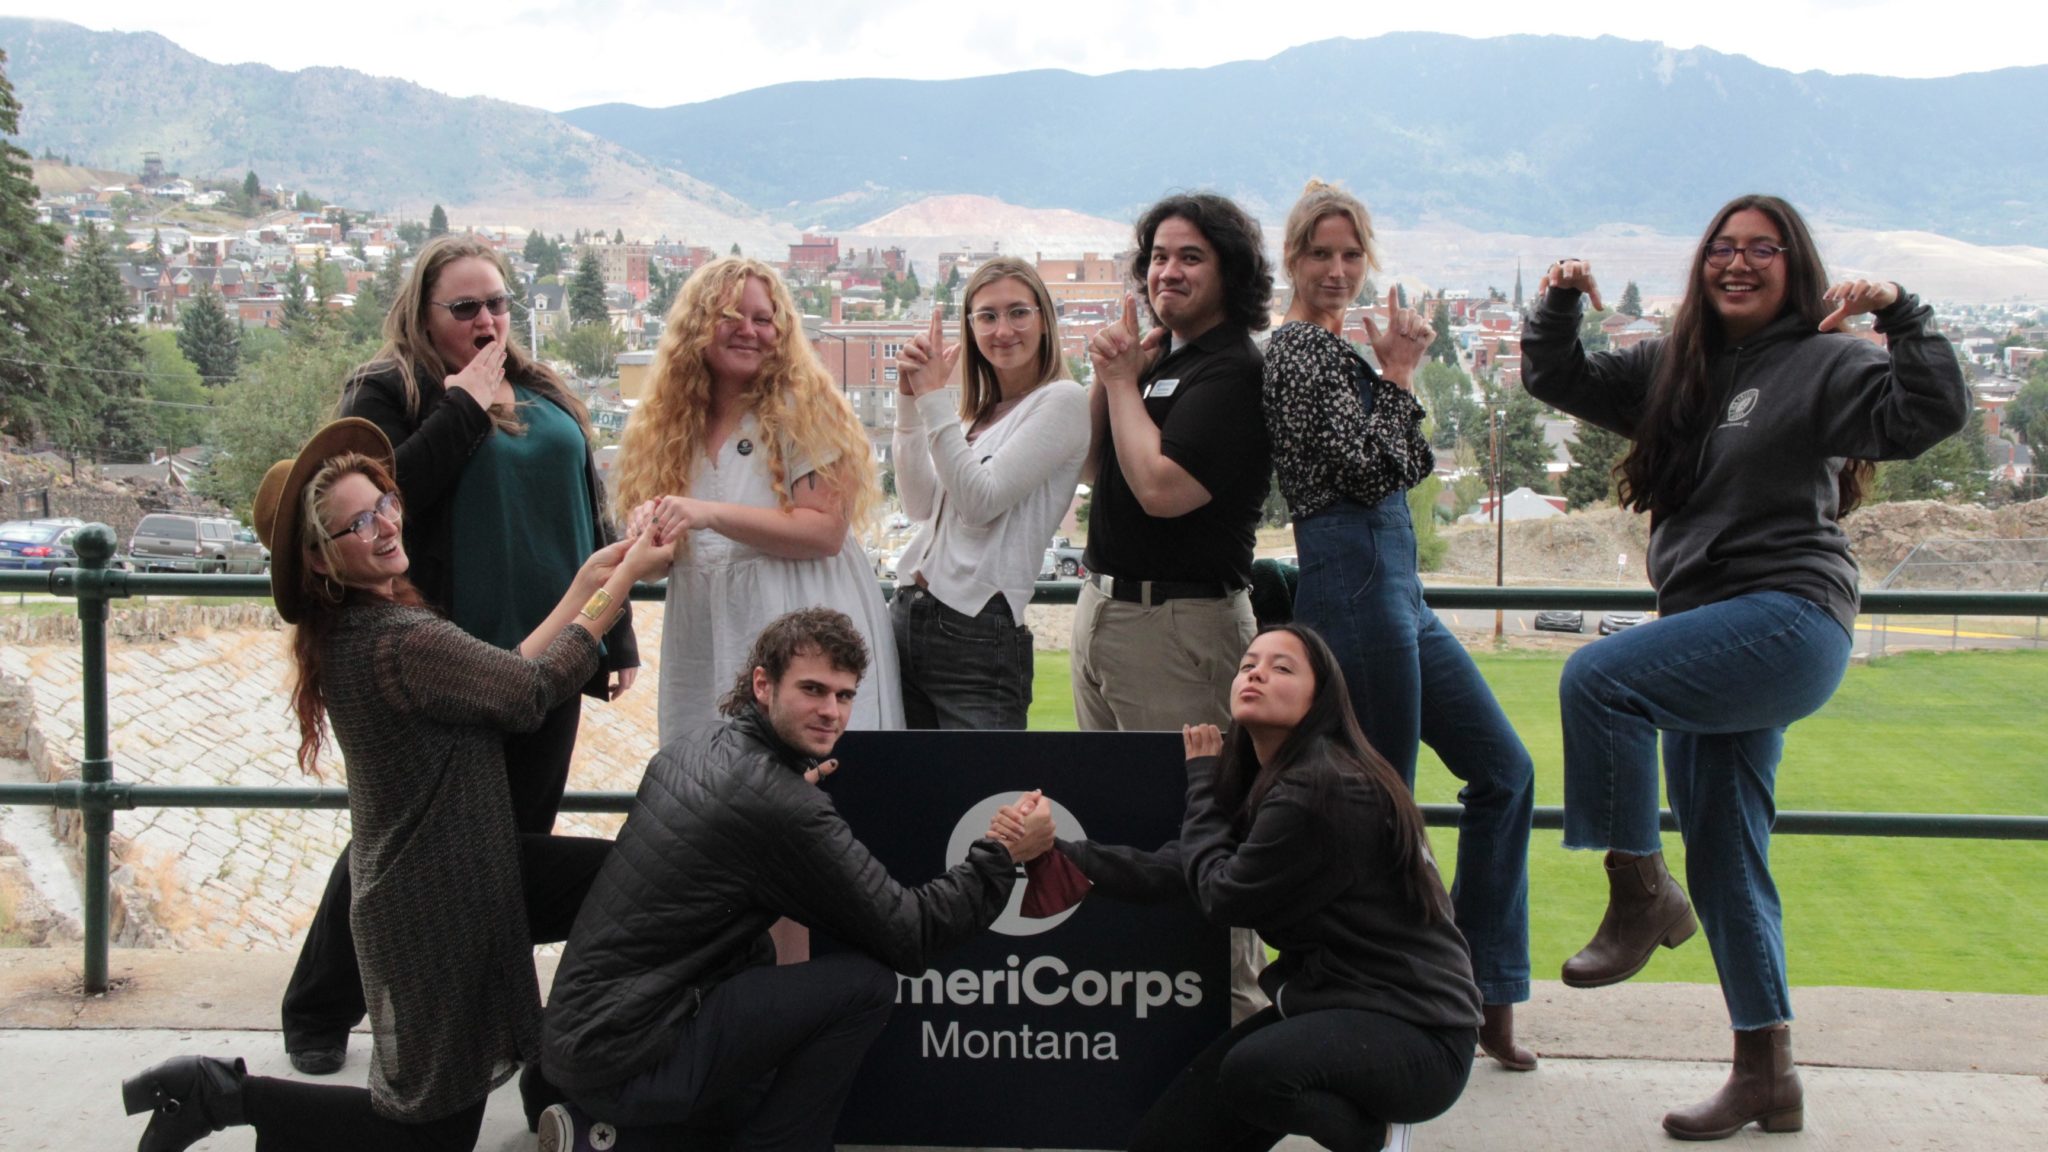 AmeriCorps members strike funny pose in front of AmeriCorps Montana sign